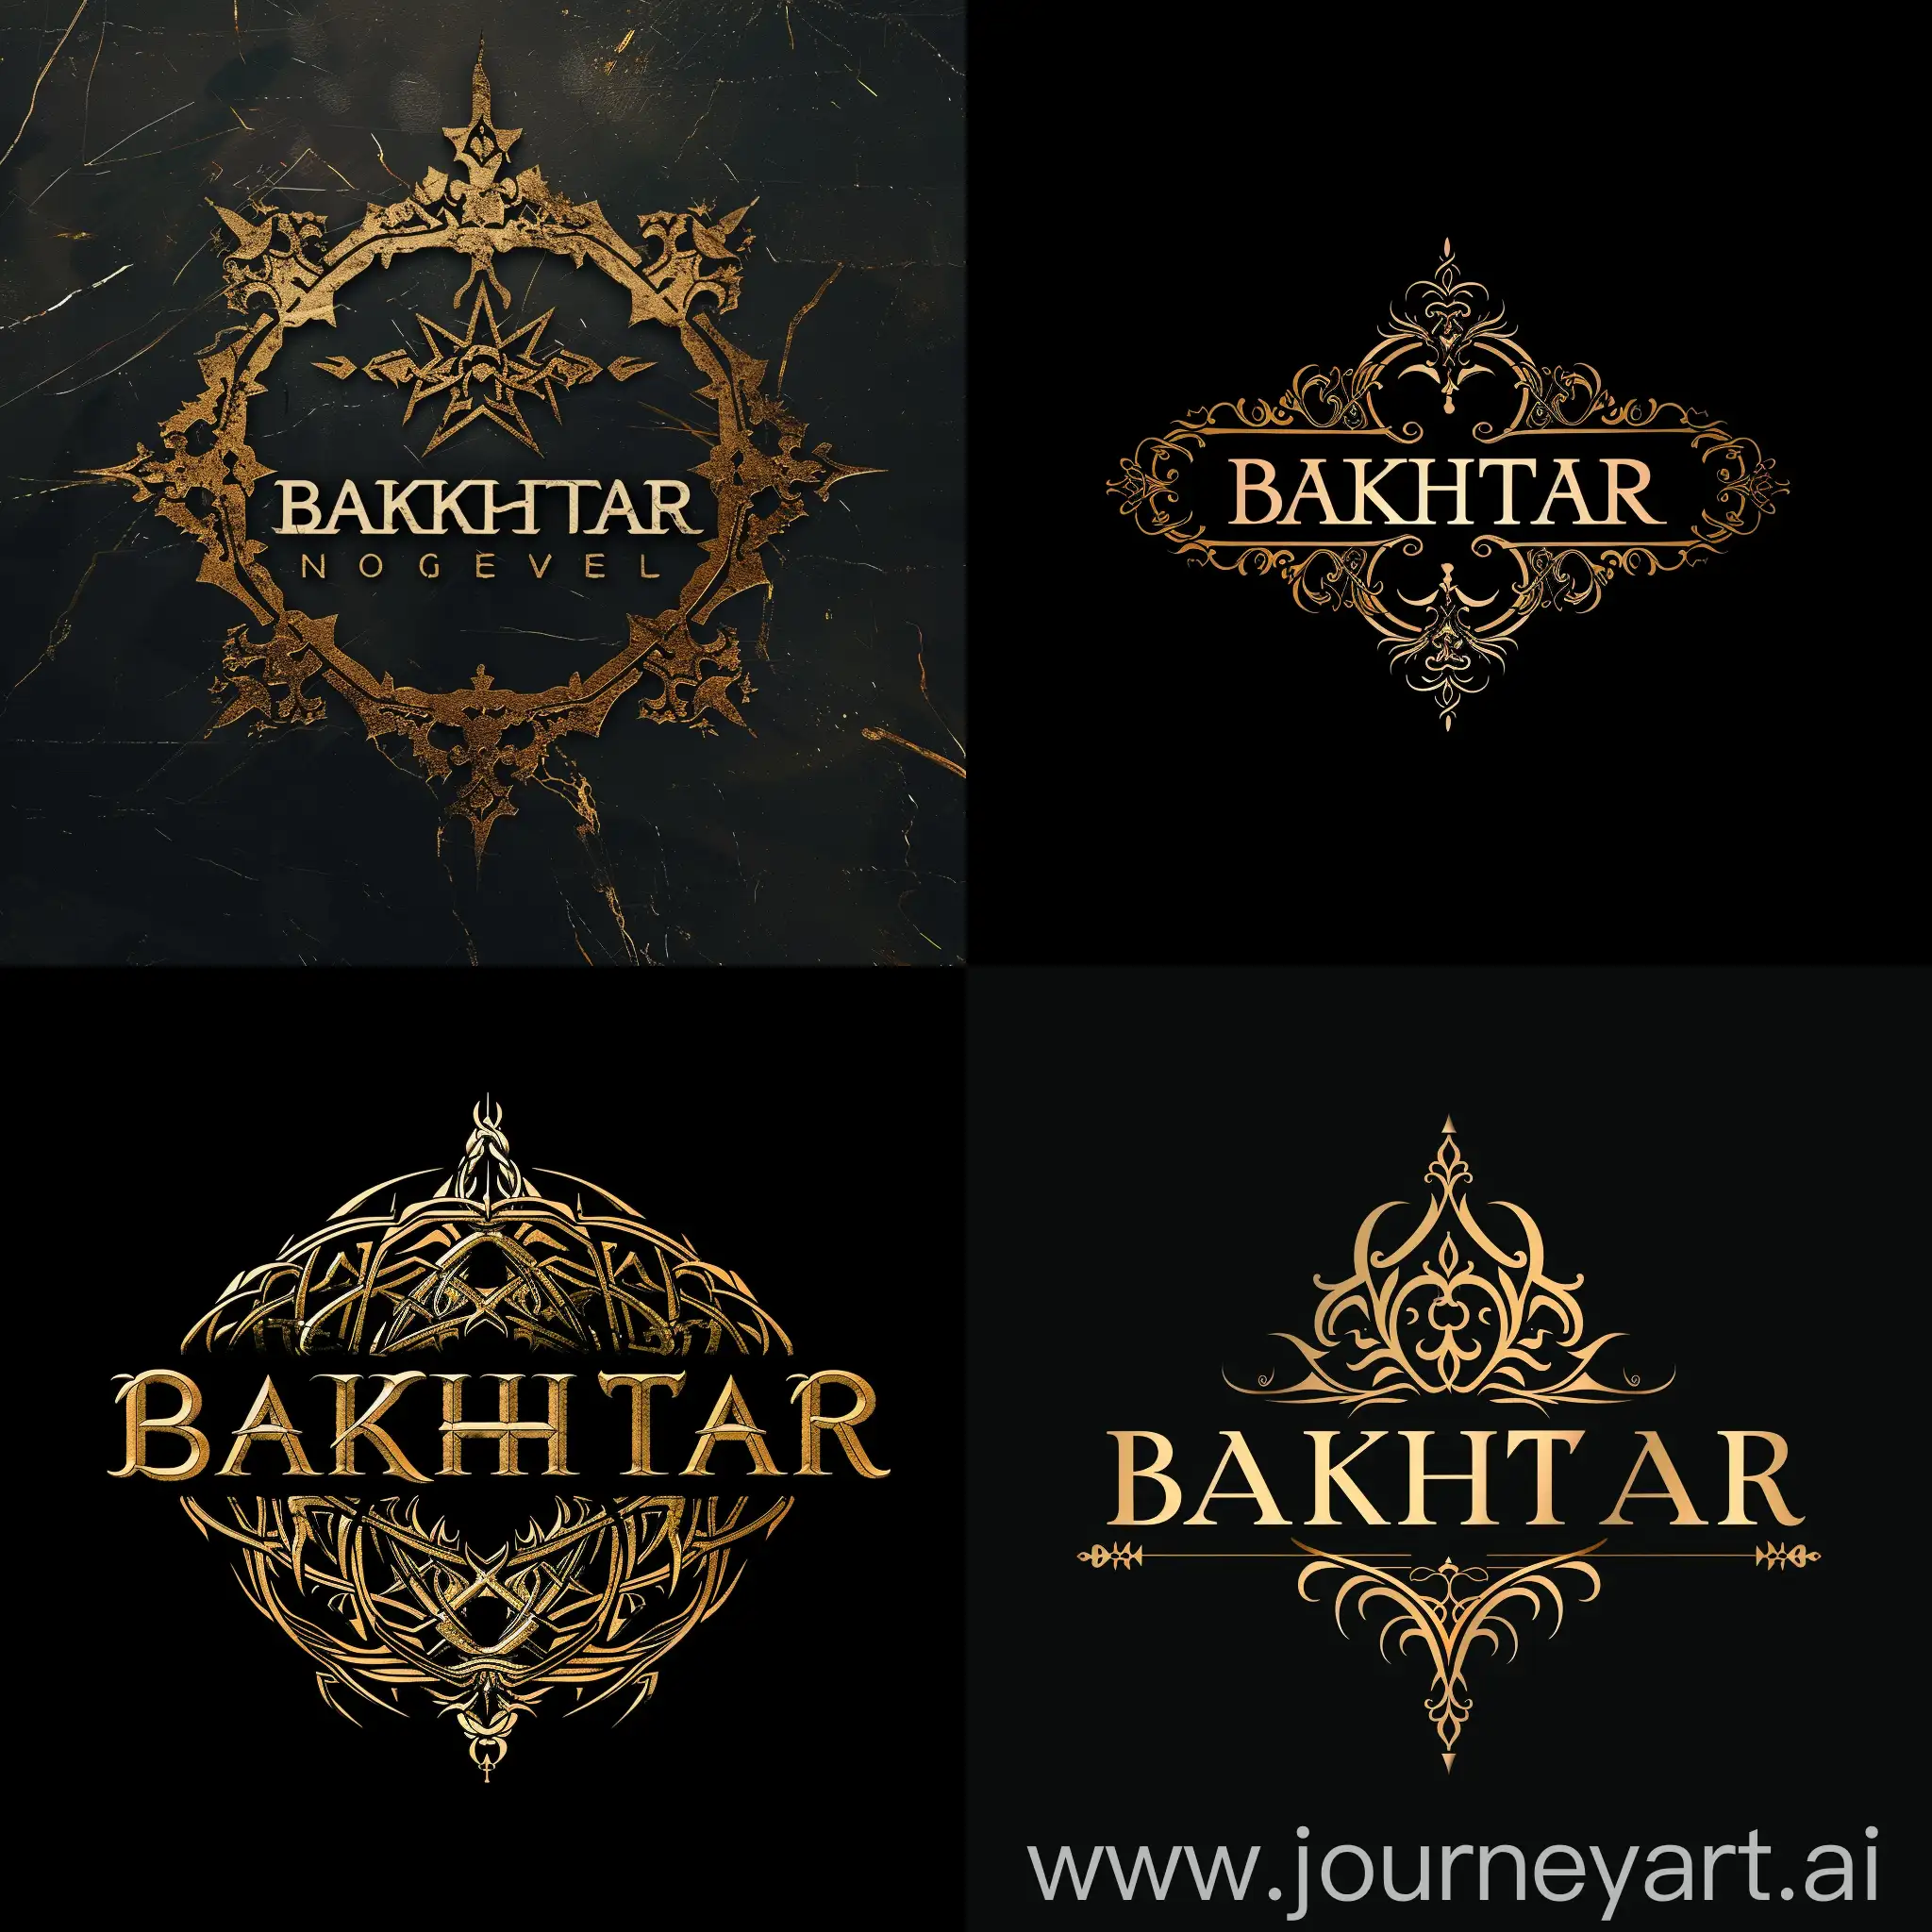 I want a logo for my website with this text: BAKHTAR